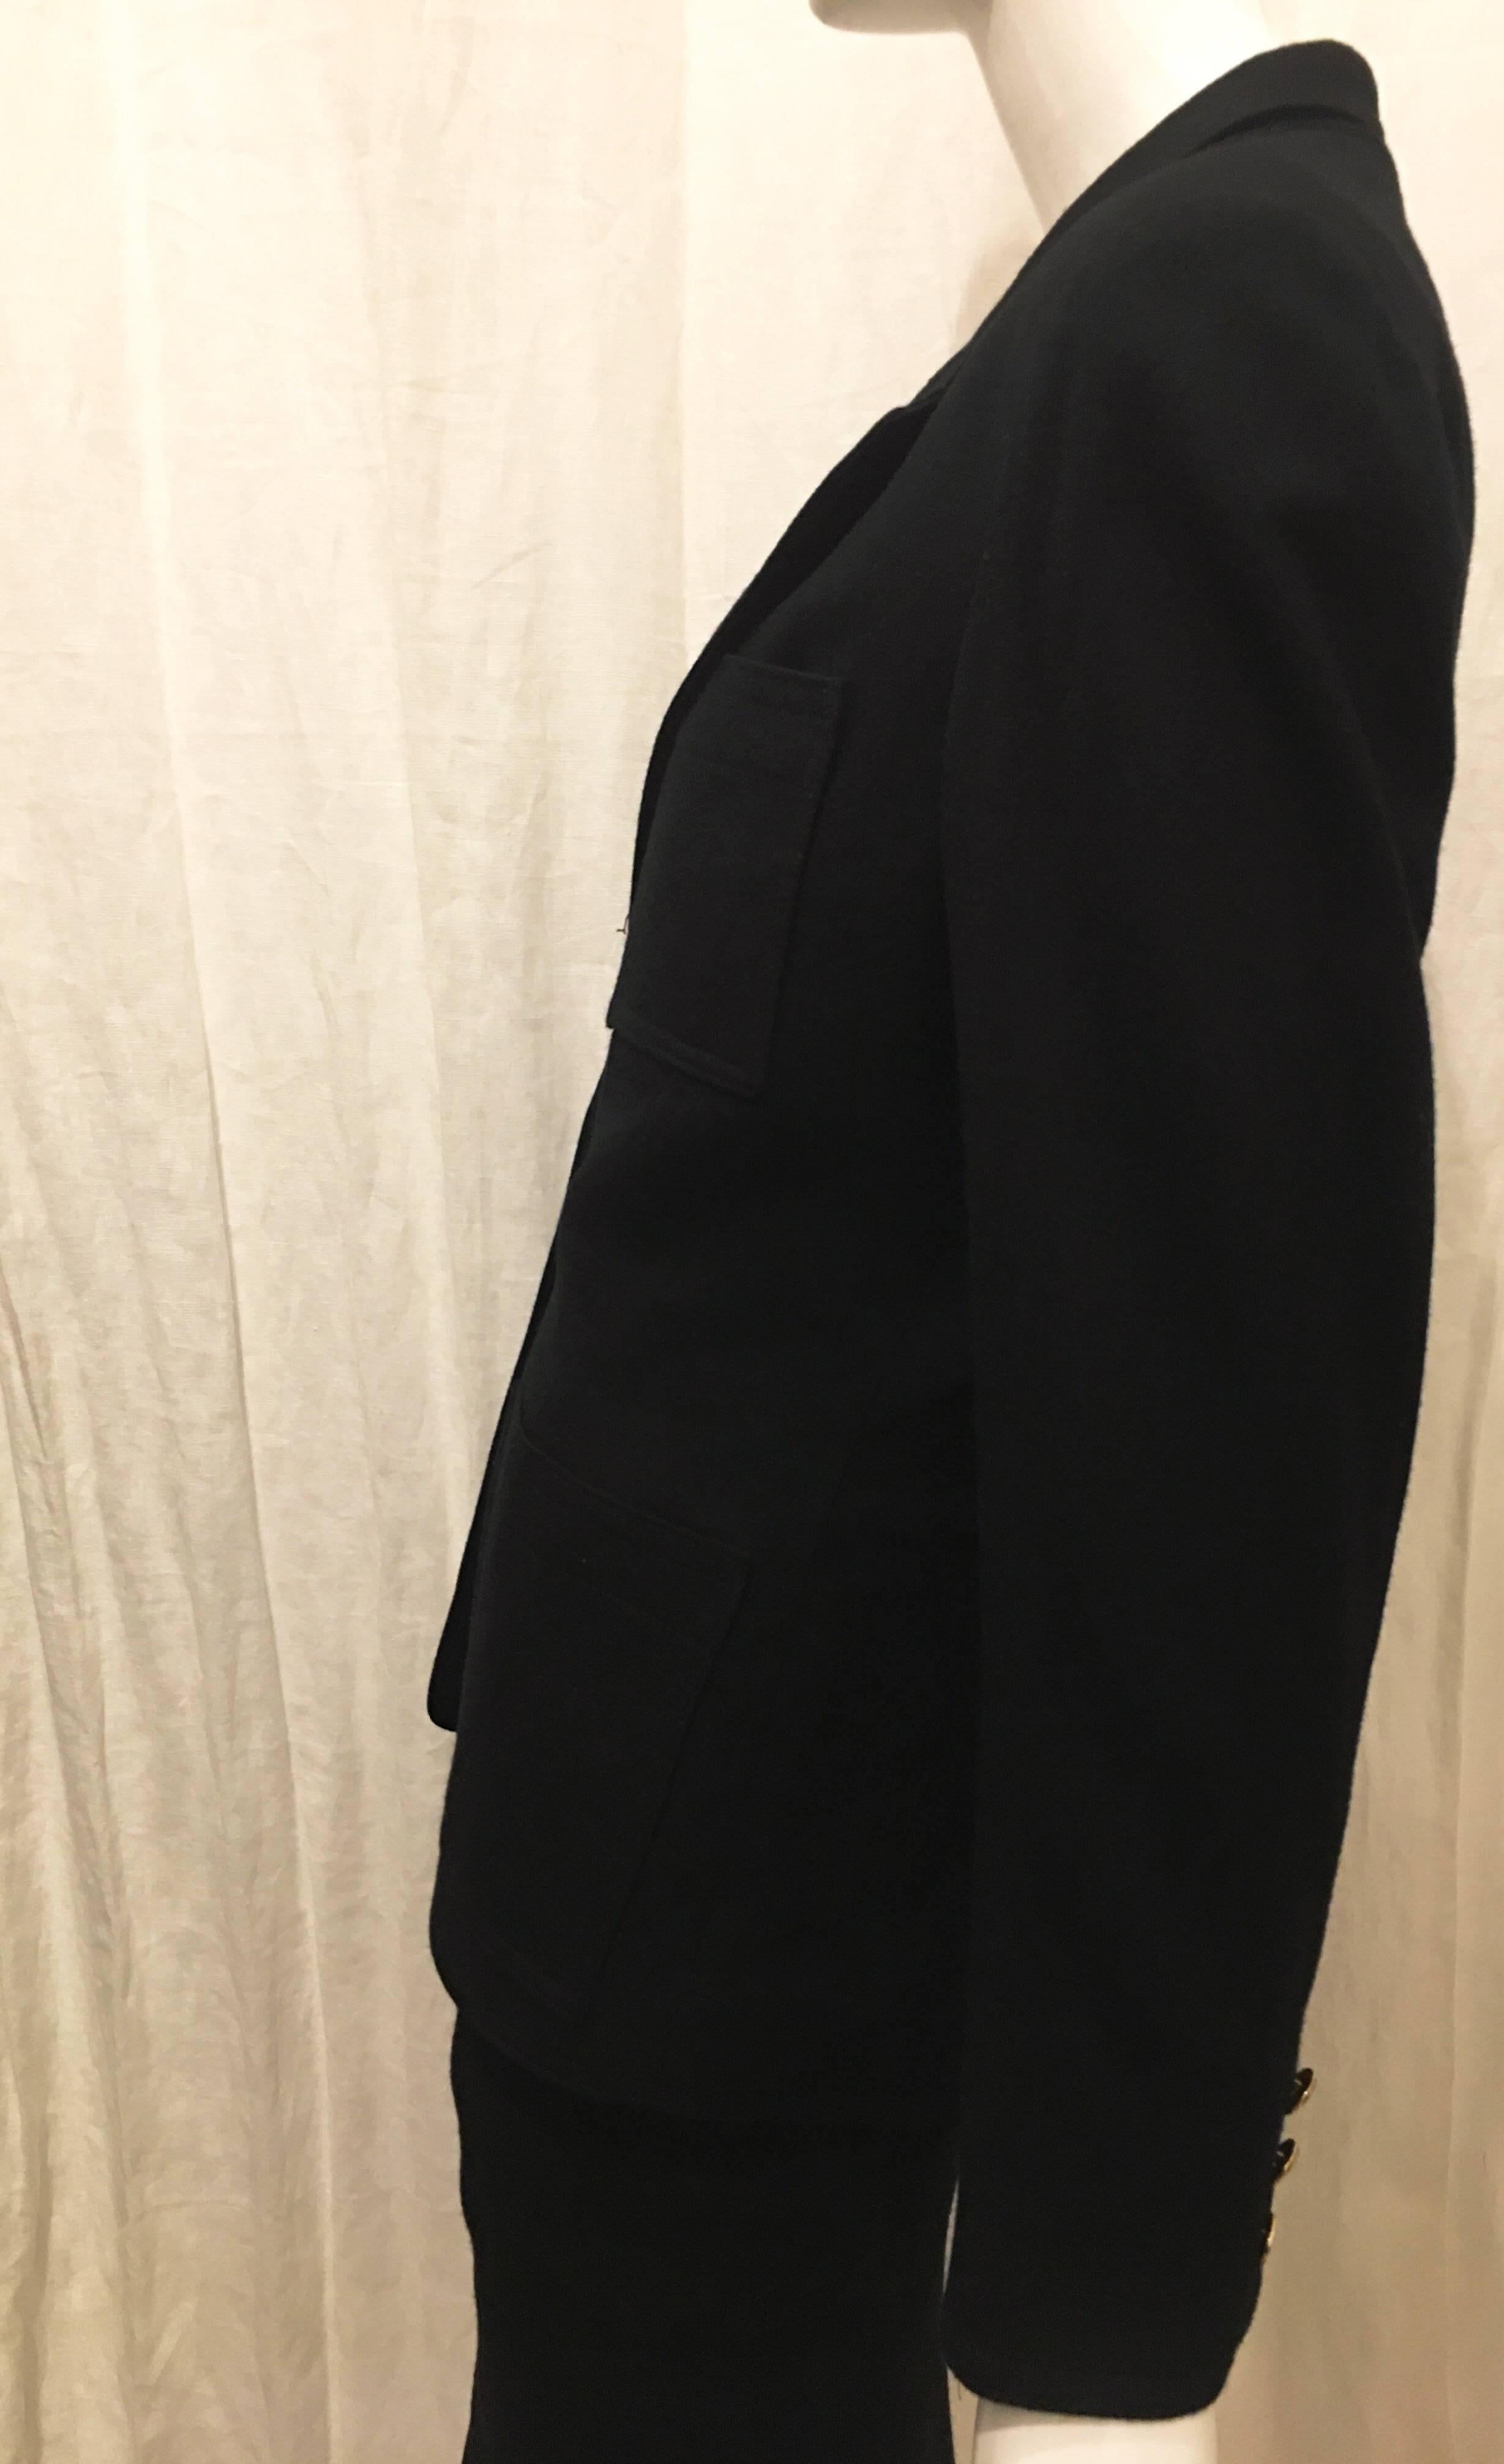 Black wool single button blazer by Givenchy. Closure is single gold button with Givenchy logo. Two pockets at front of jacket close to bottom hem as well as a single pocket at the left breast. Stitching is also black. Simple staple piece that can be